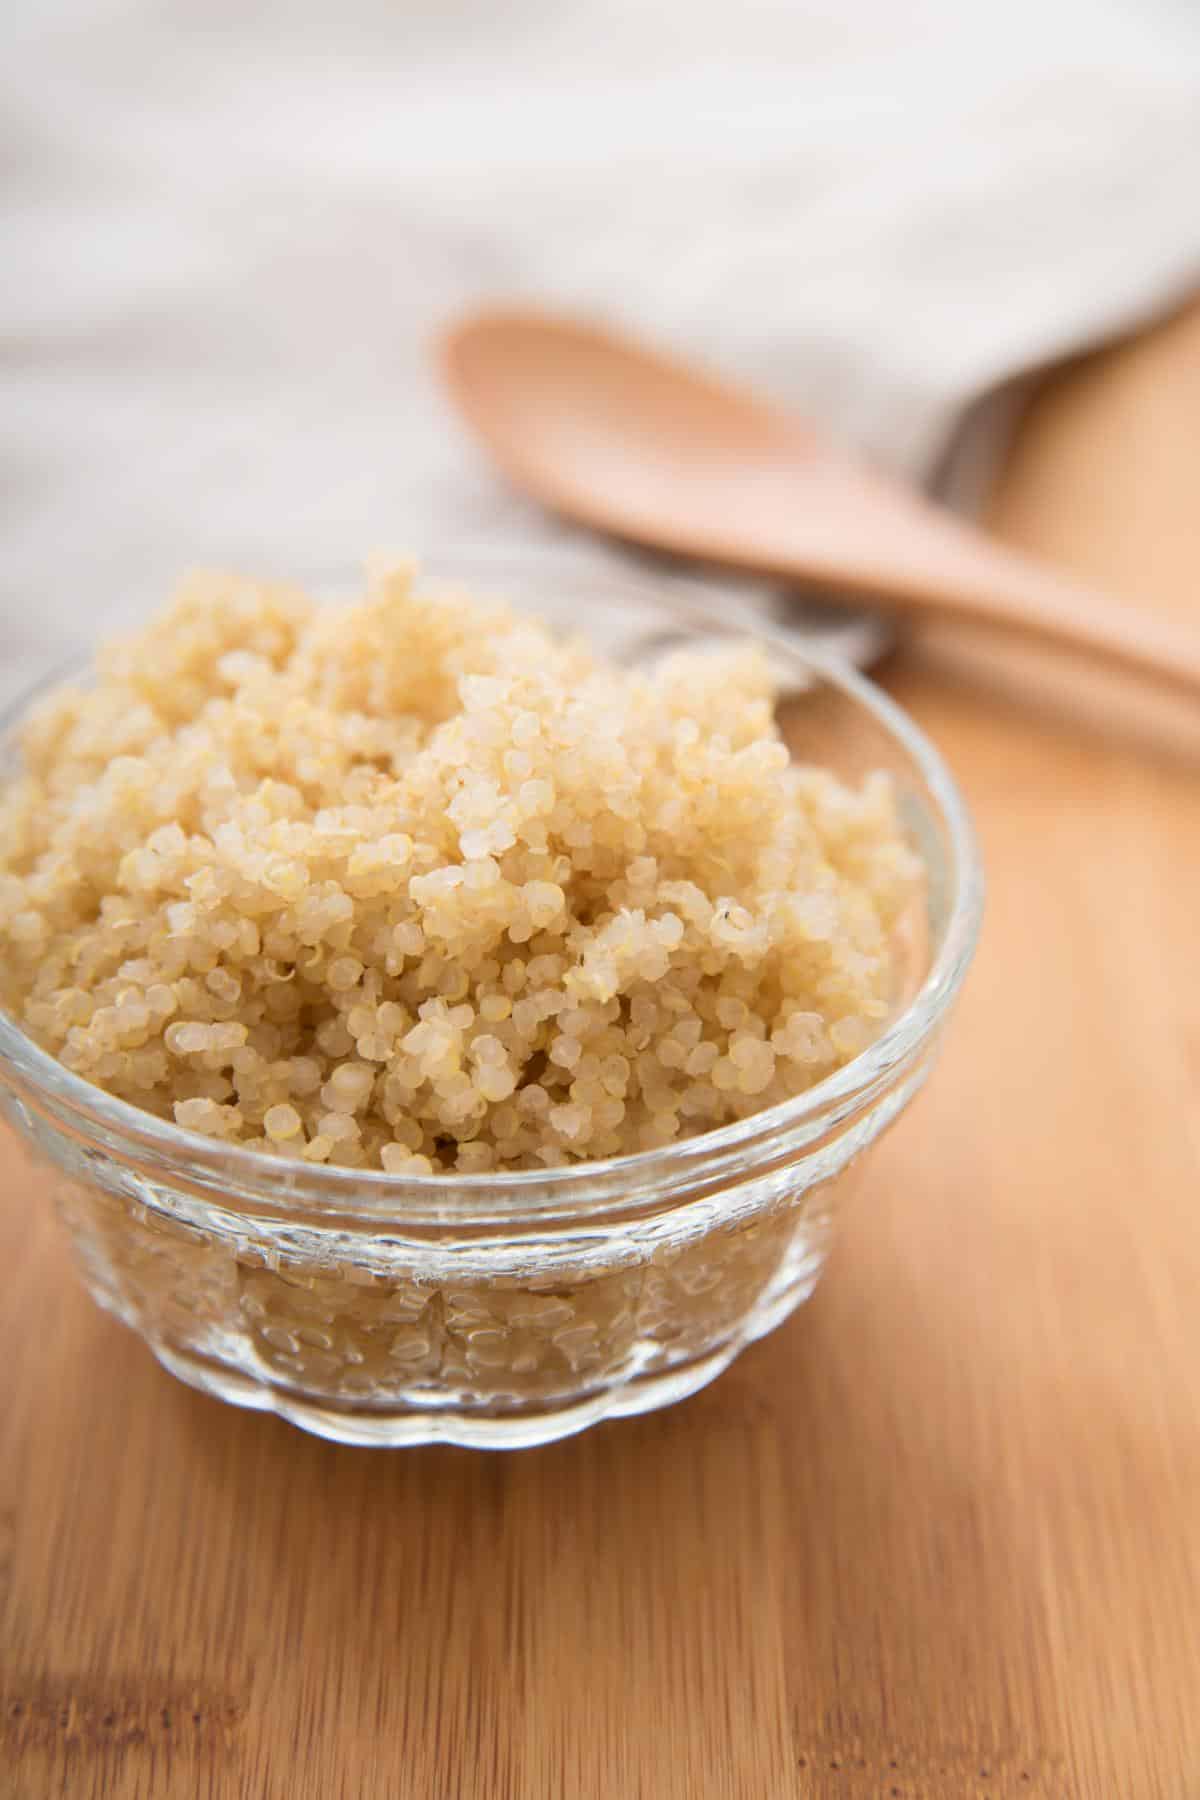 Small glass bowl with cooked white quinoa and wooden spoon in background.